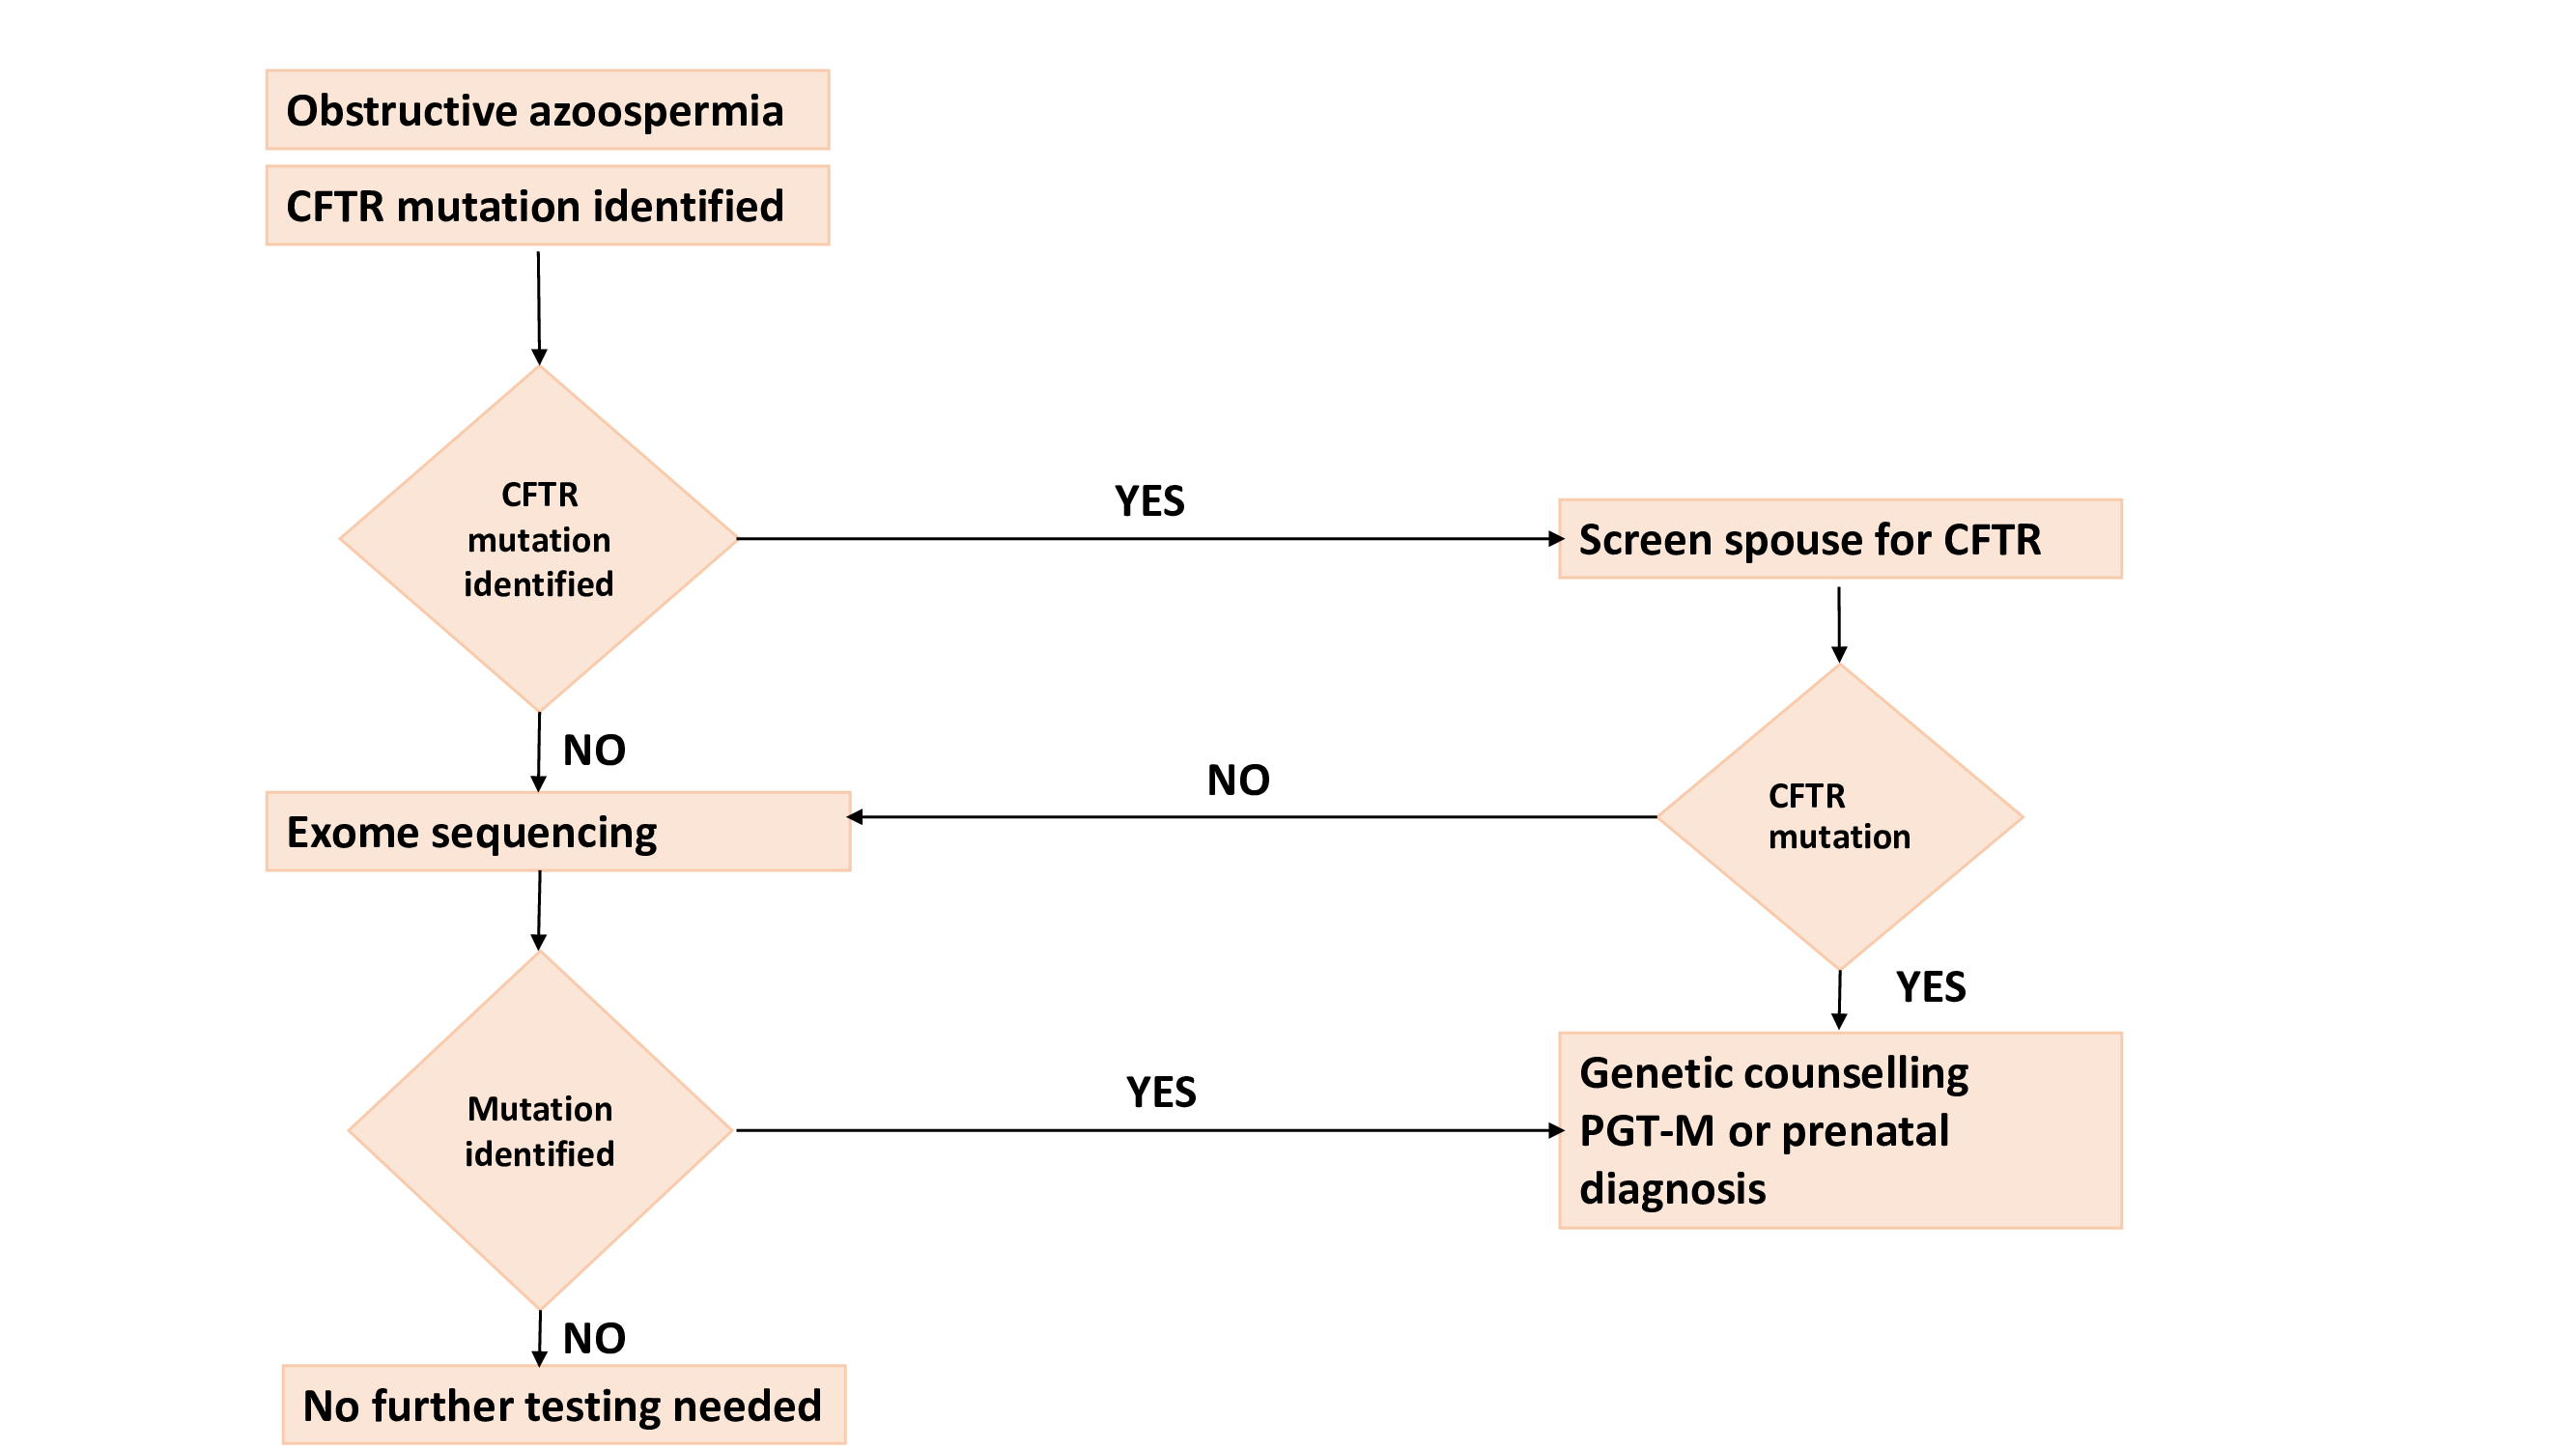 Algorithm for genetic testing in men with obstructive azoospermia